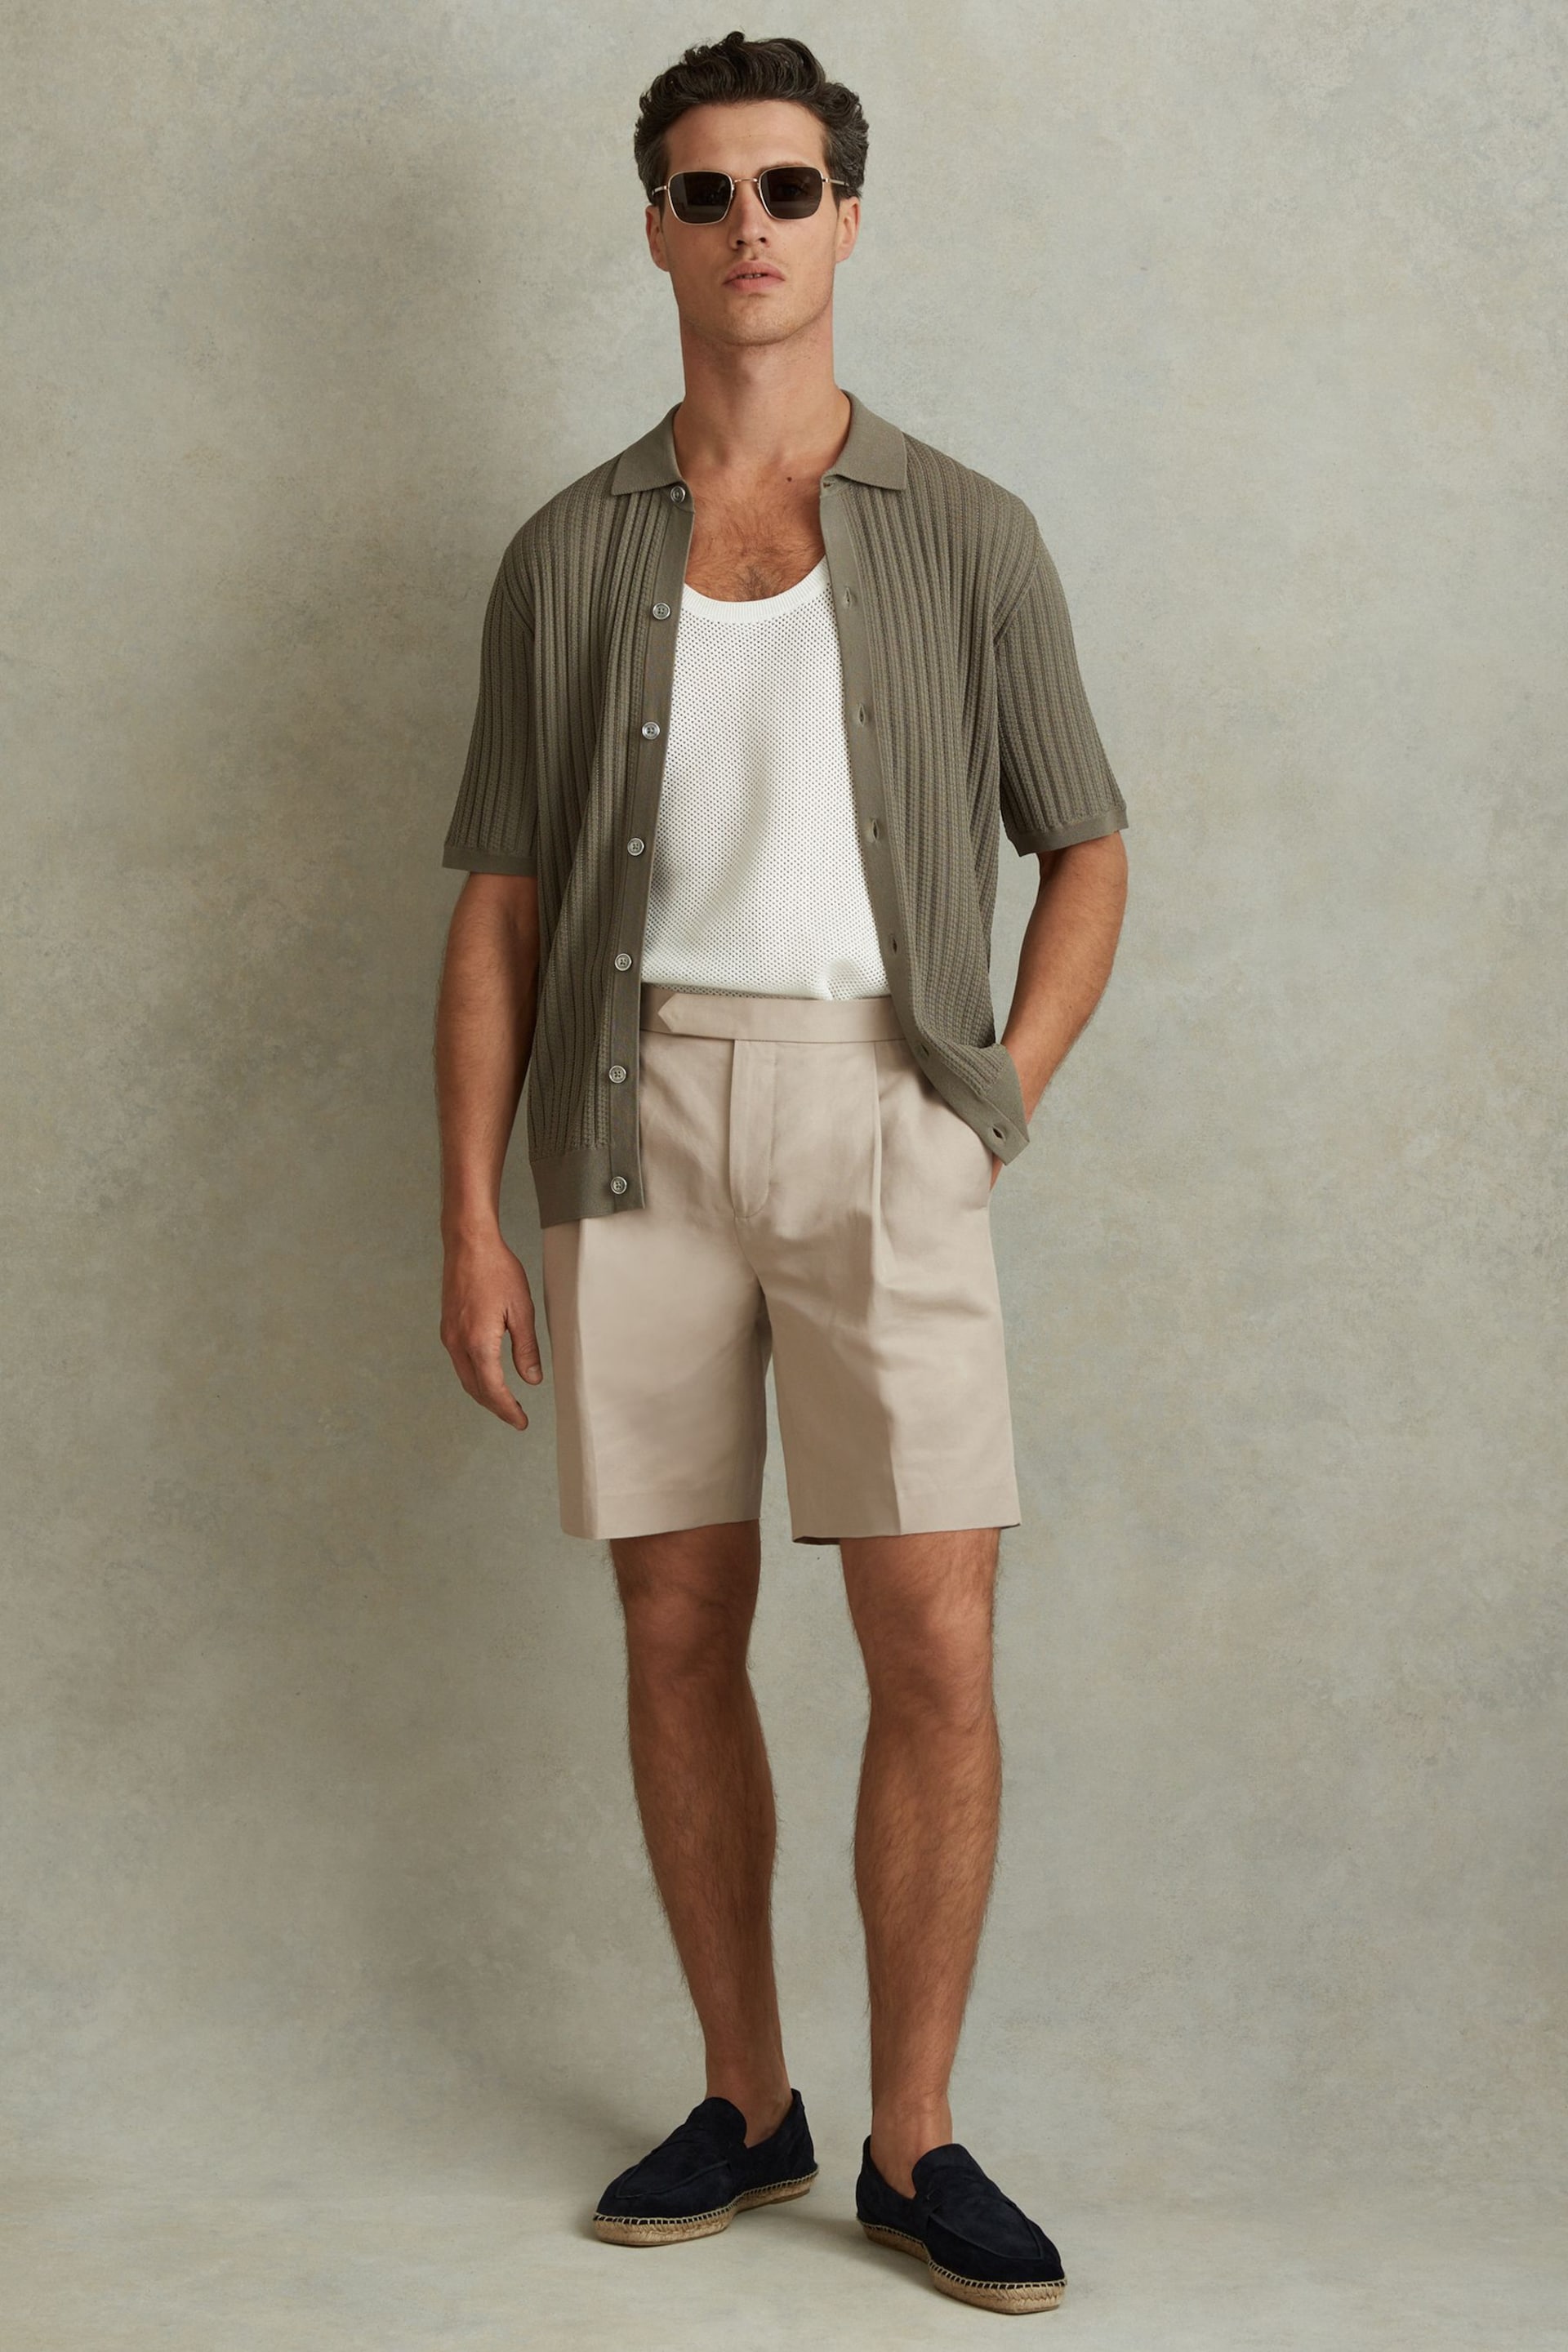 Reiss Stone Con Cotton Blend Adjuster Shorts - Image 1 of 5